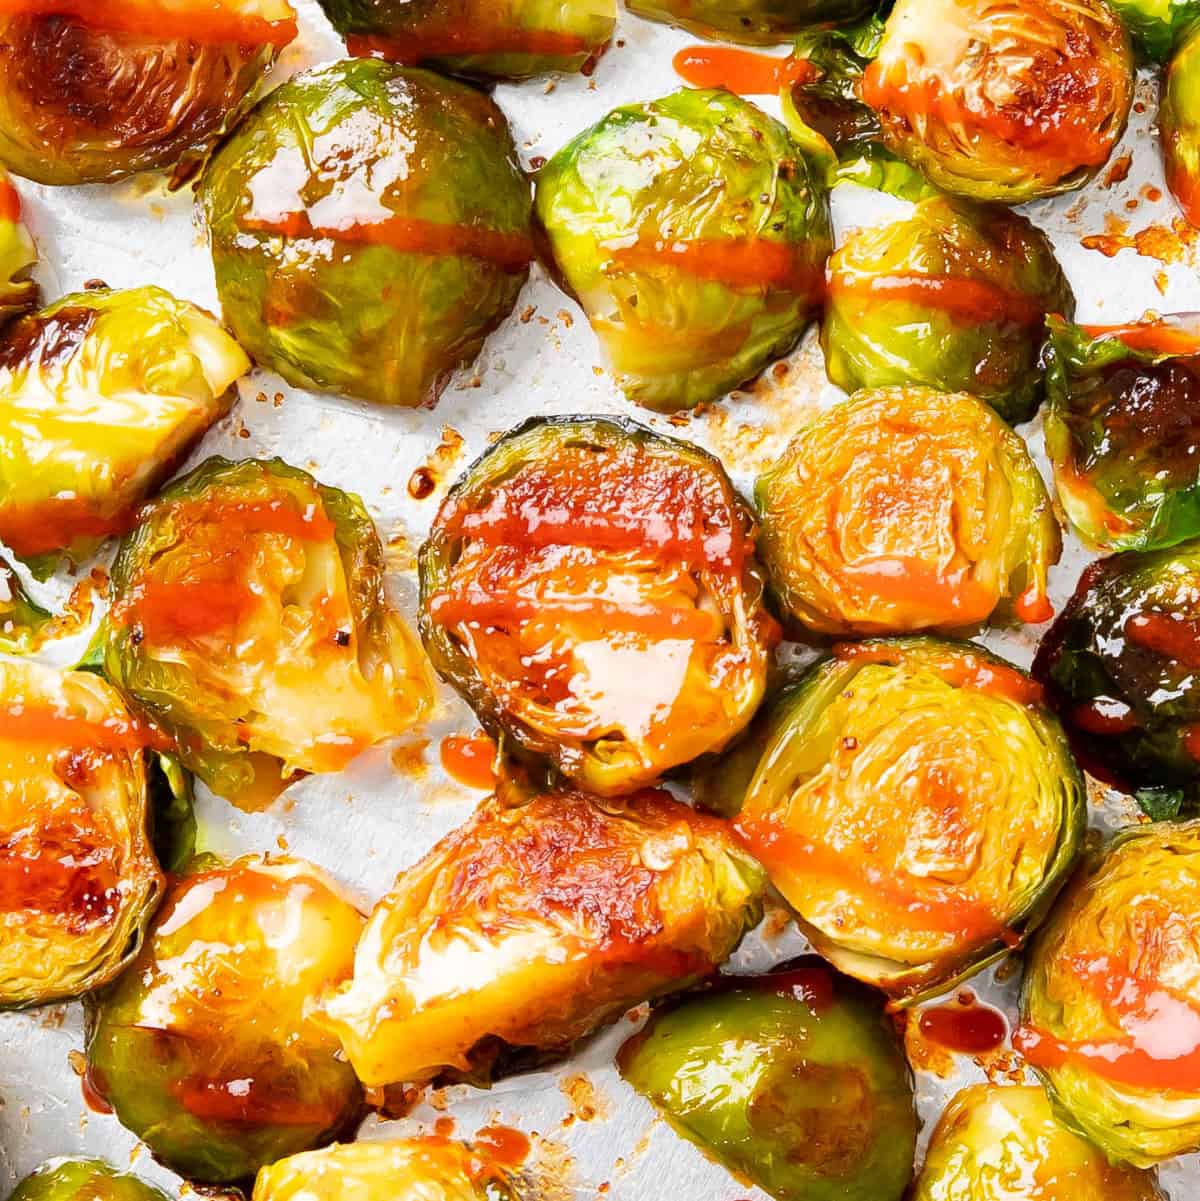 Honey Sriracha Brussels Sprouts